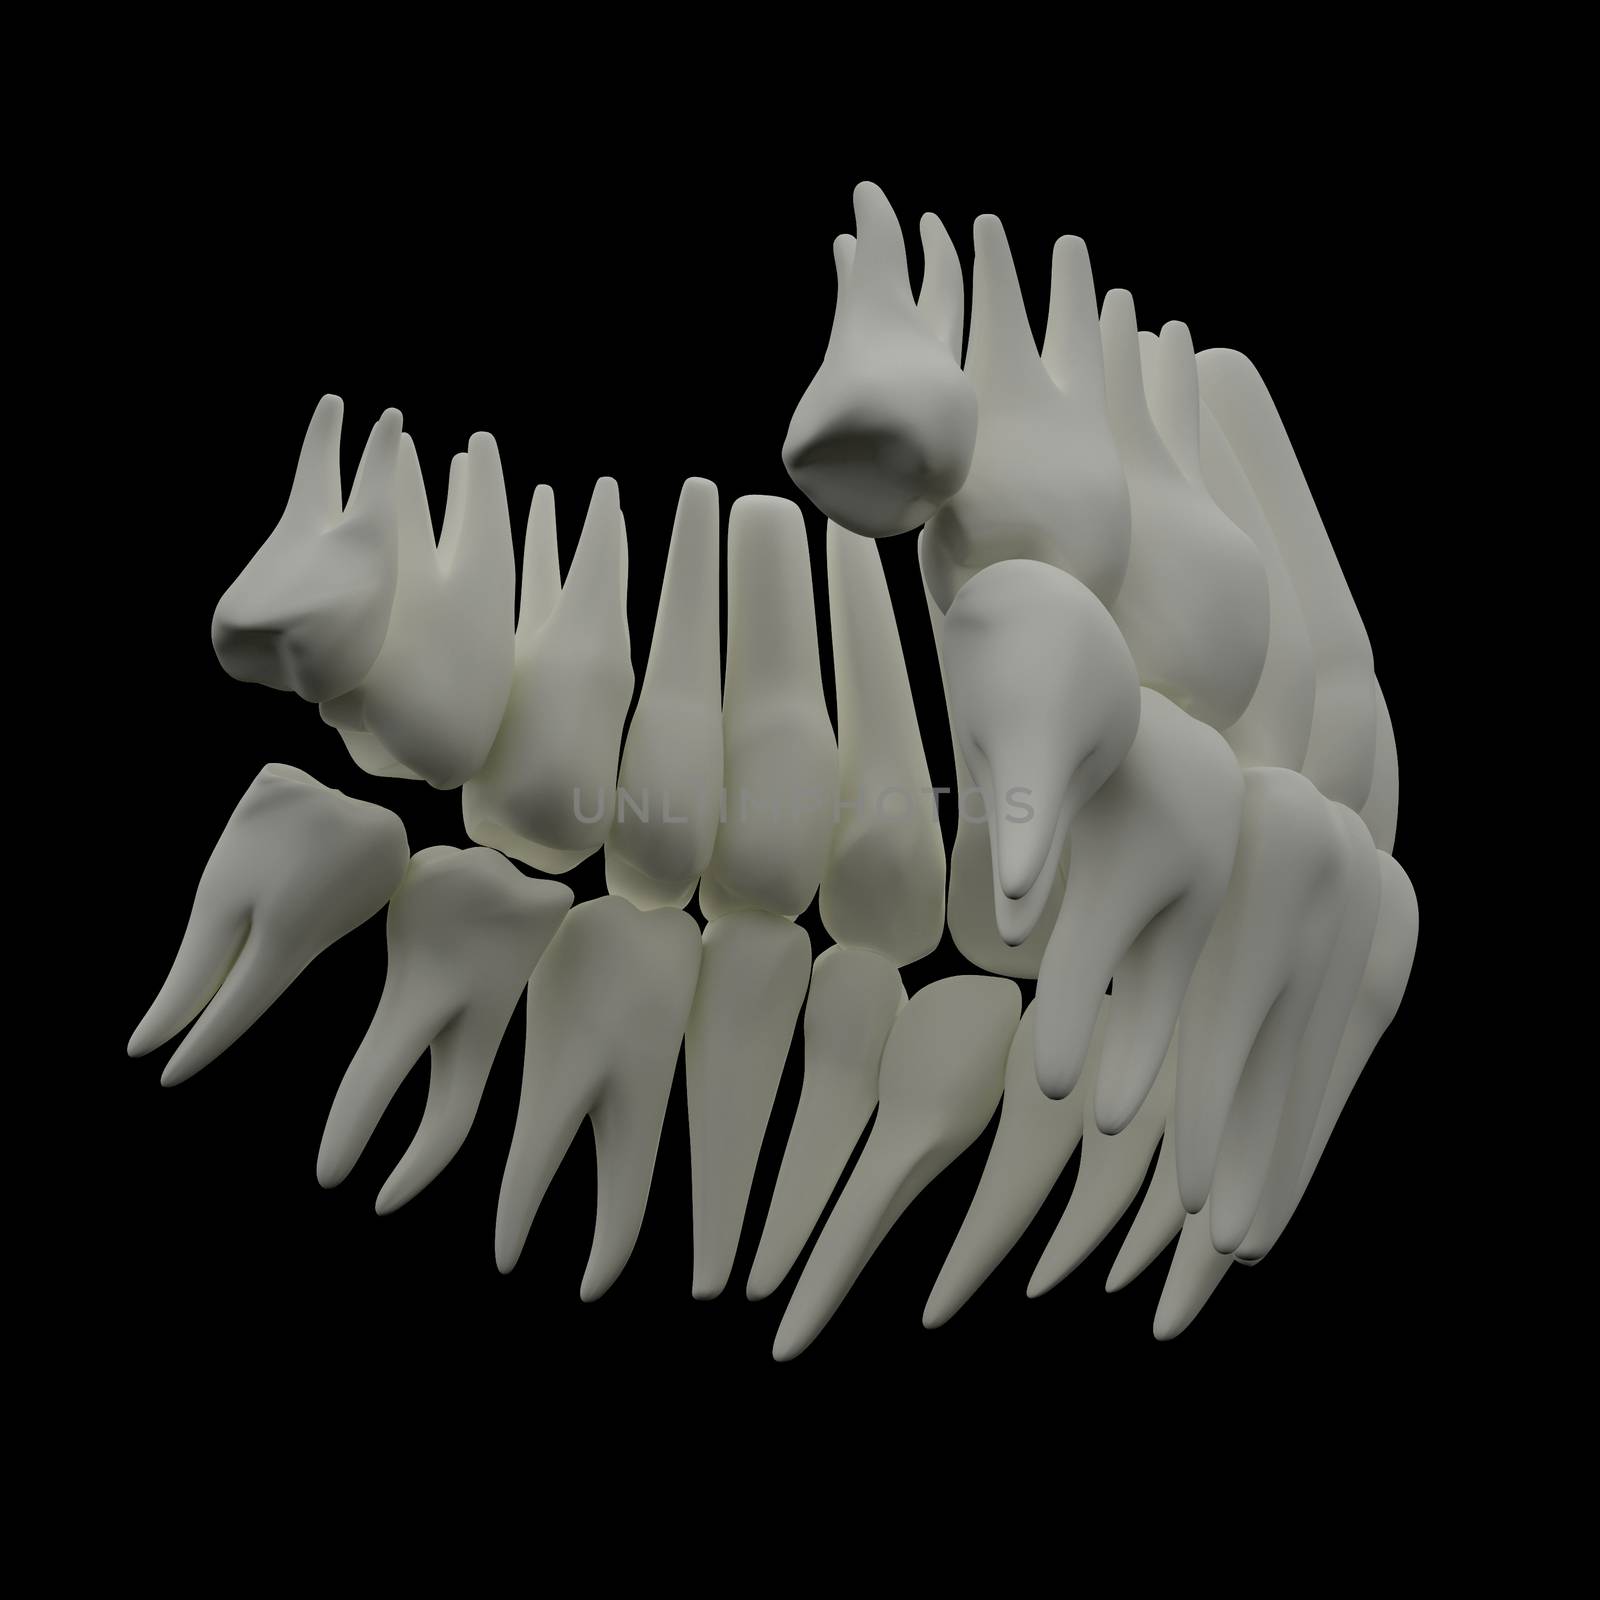 3d image of white teeth isolated on black - bottom view